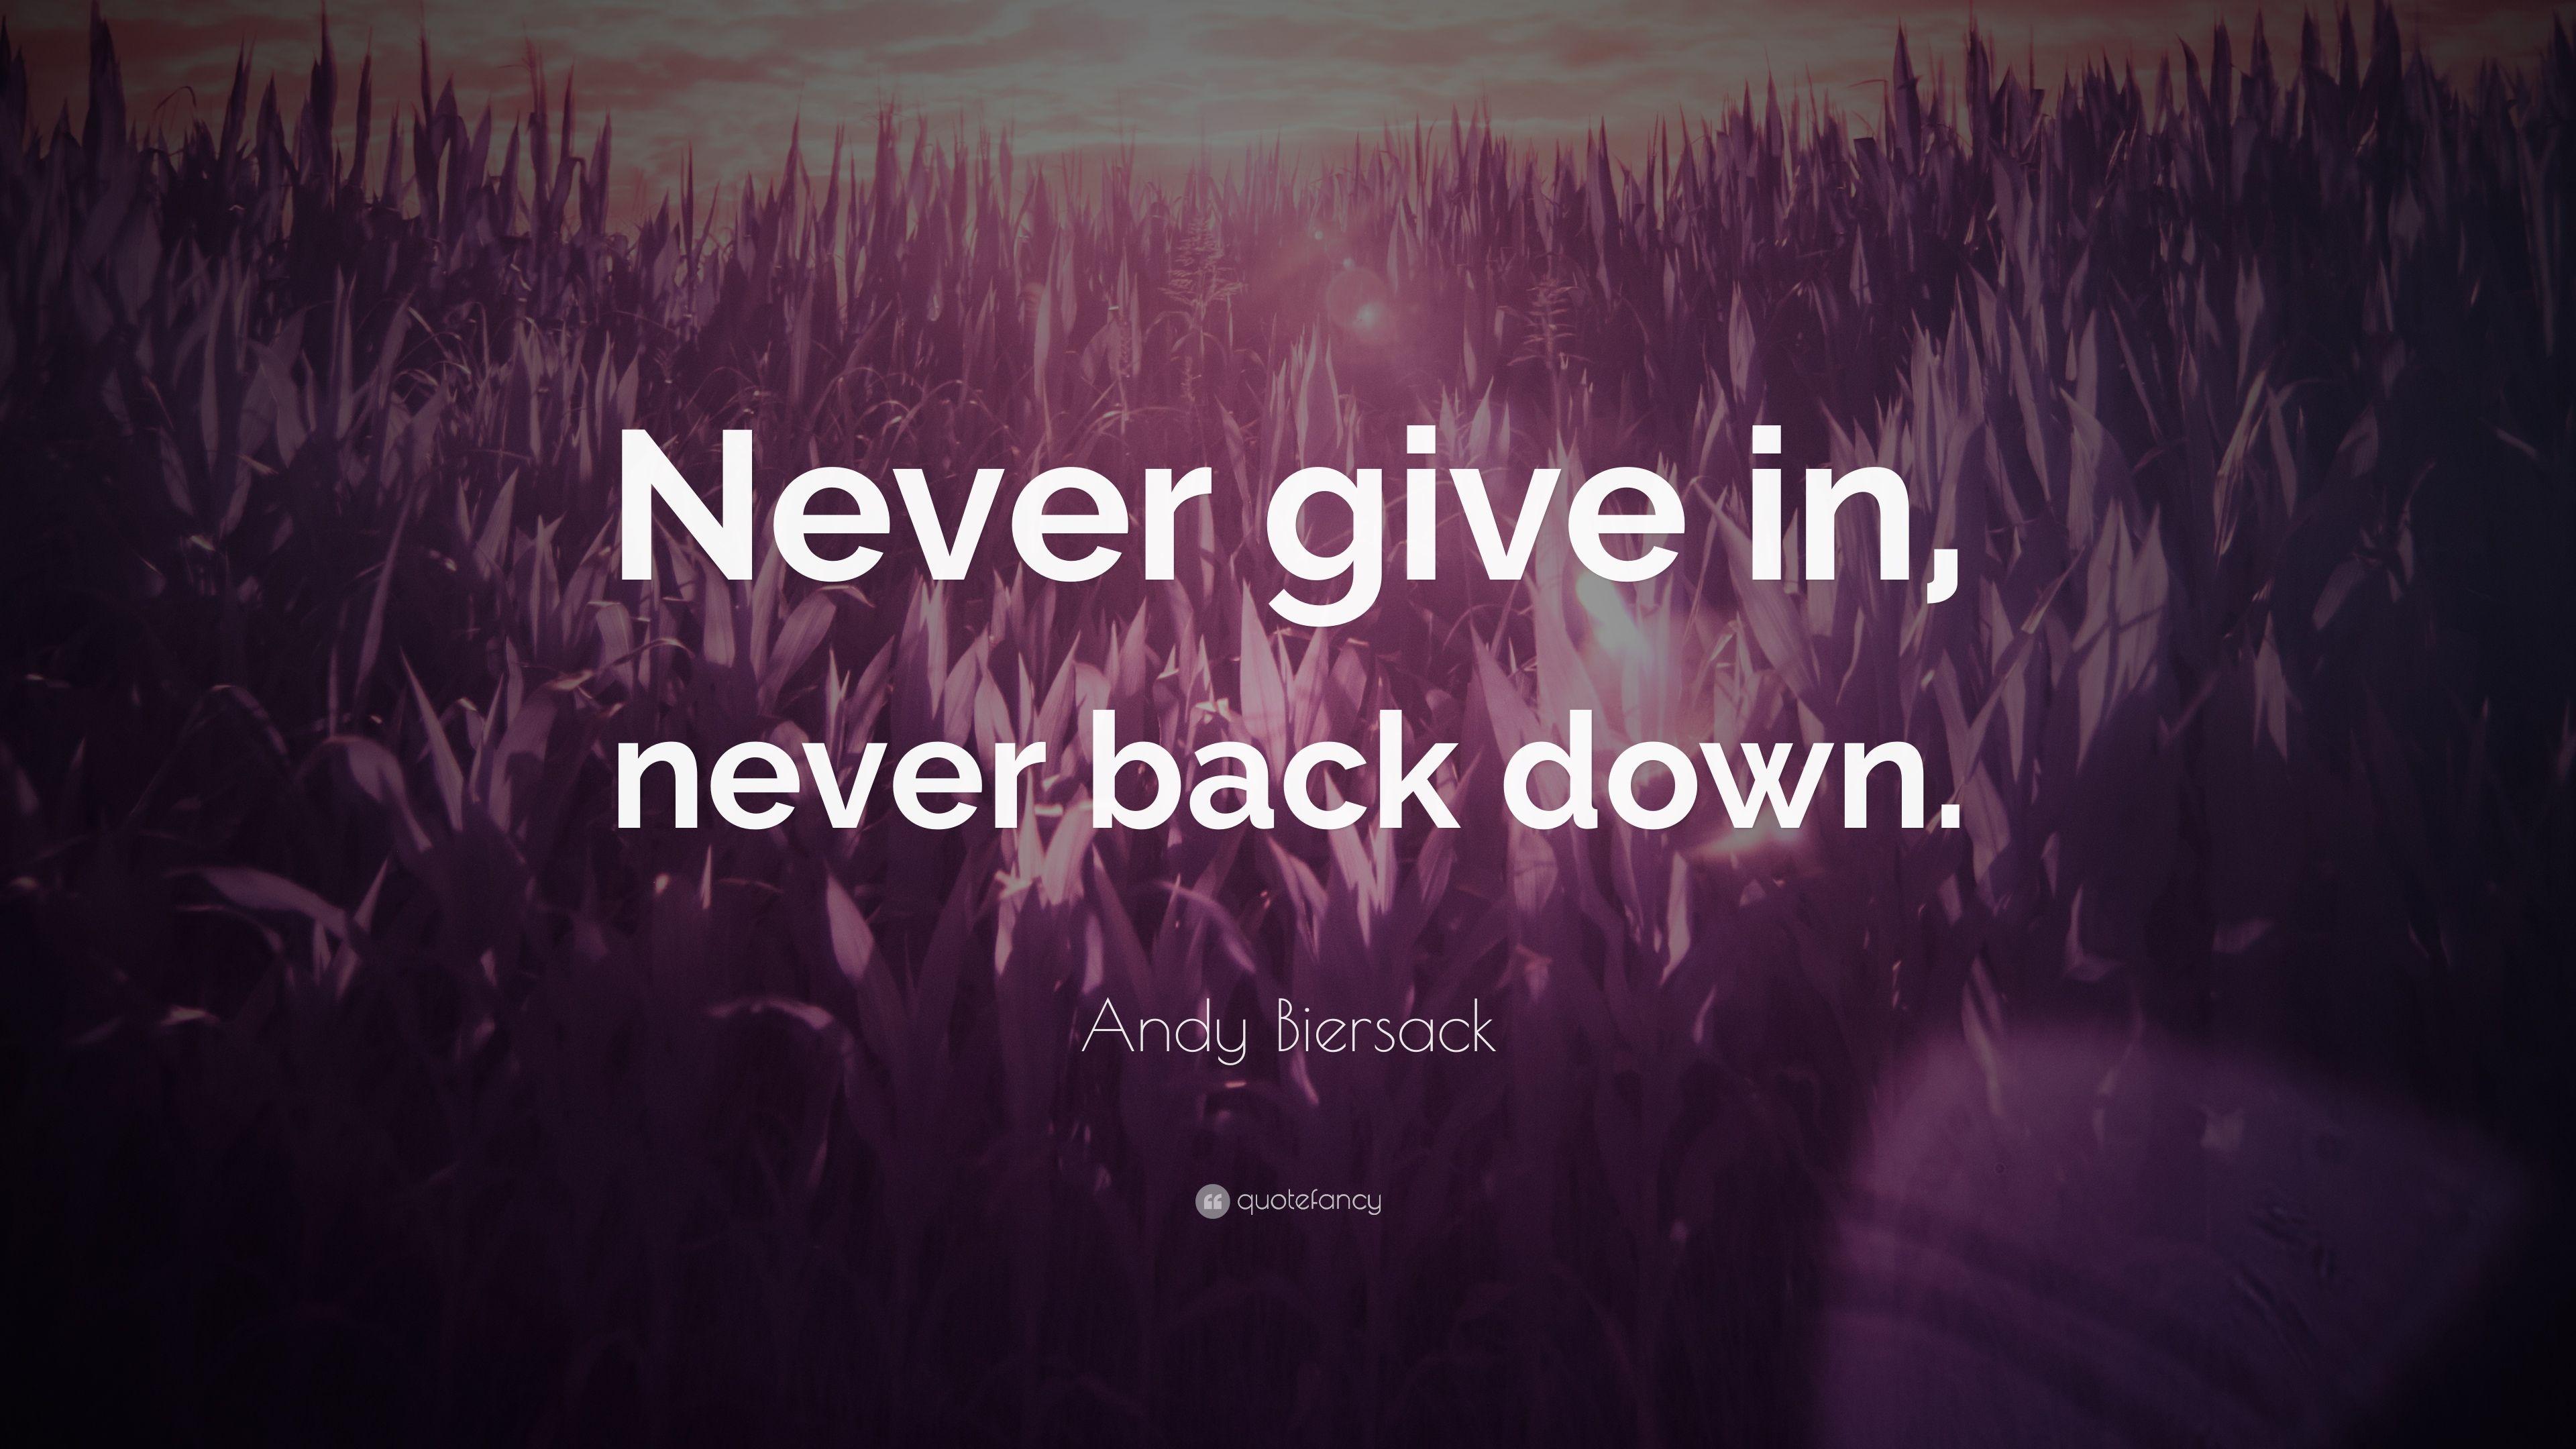 Andy Biersack Quote: “Never give in, never back down.” 8